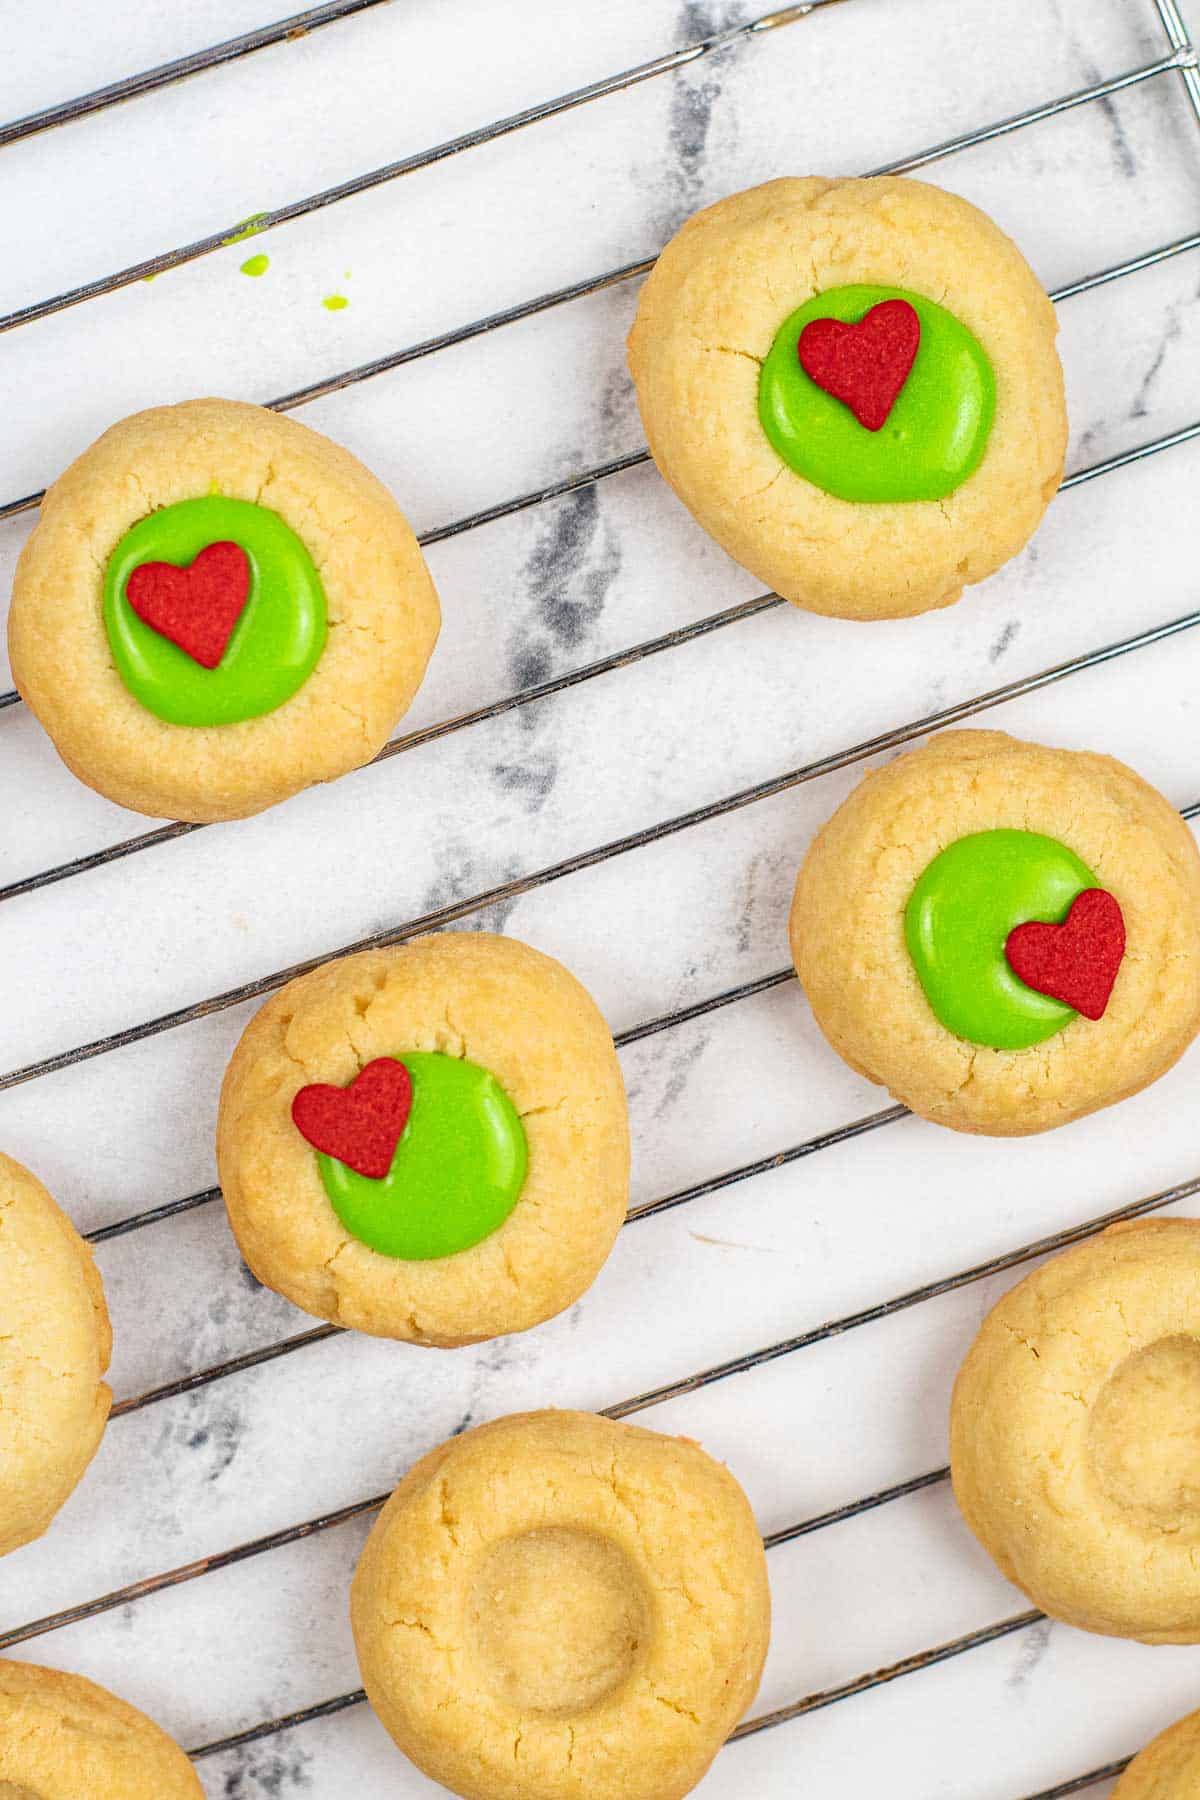 butter thumbprint cookies with green icing and a little red candy heart in the middle of some.